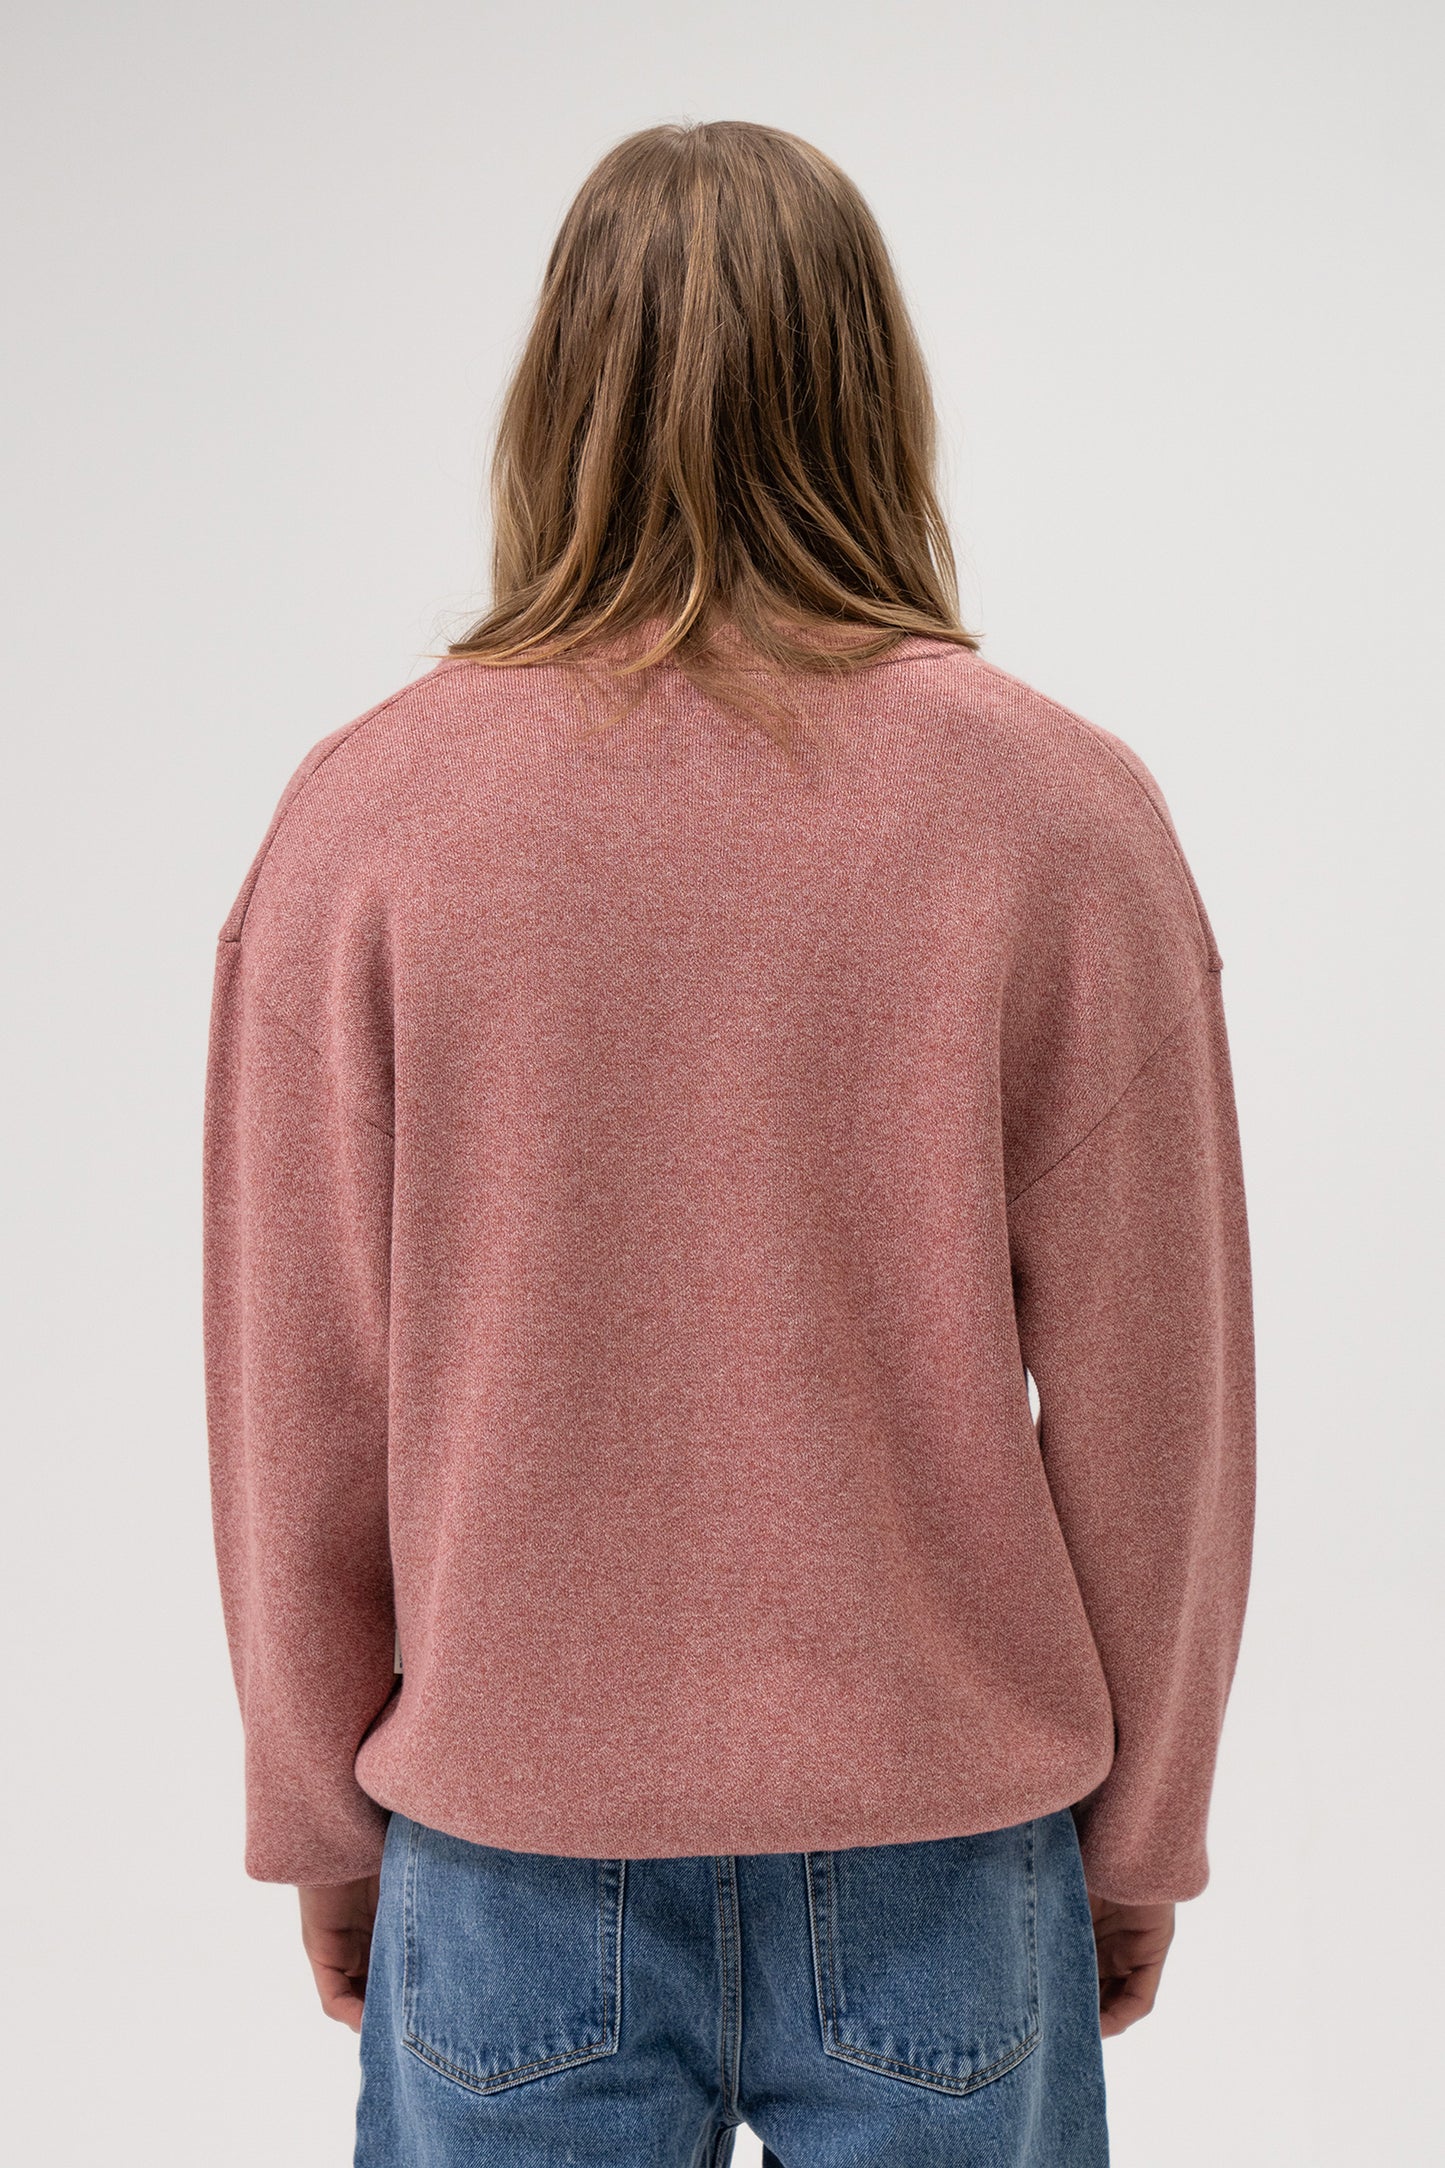 RED MARL KNIT SWEATER